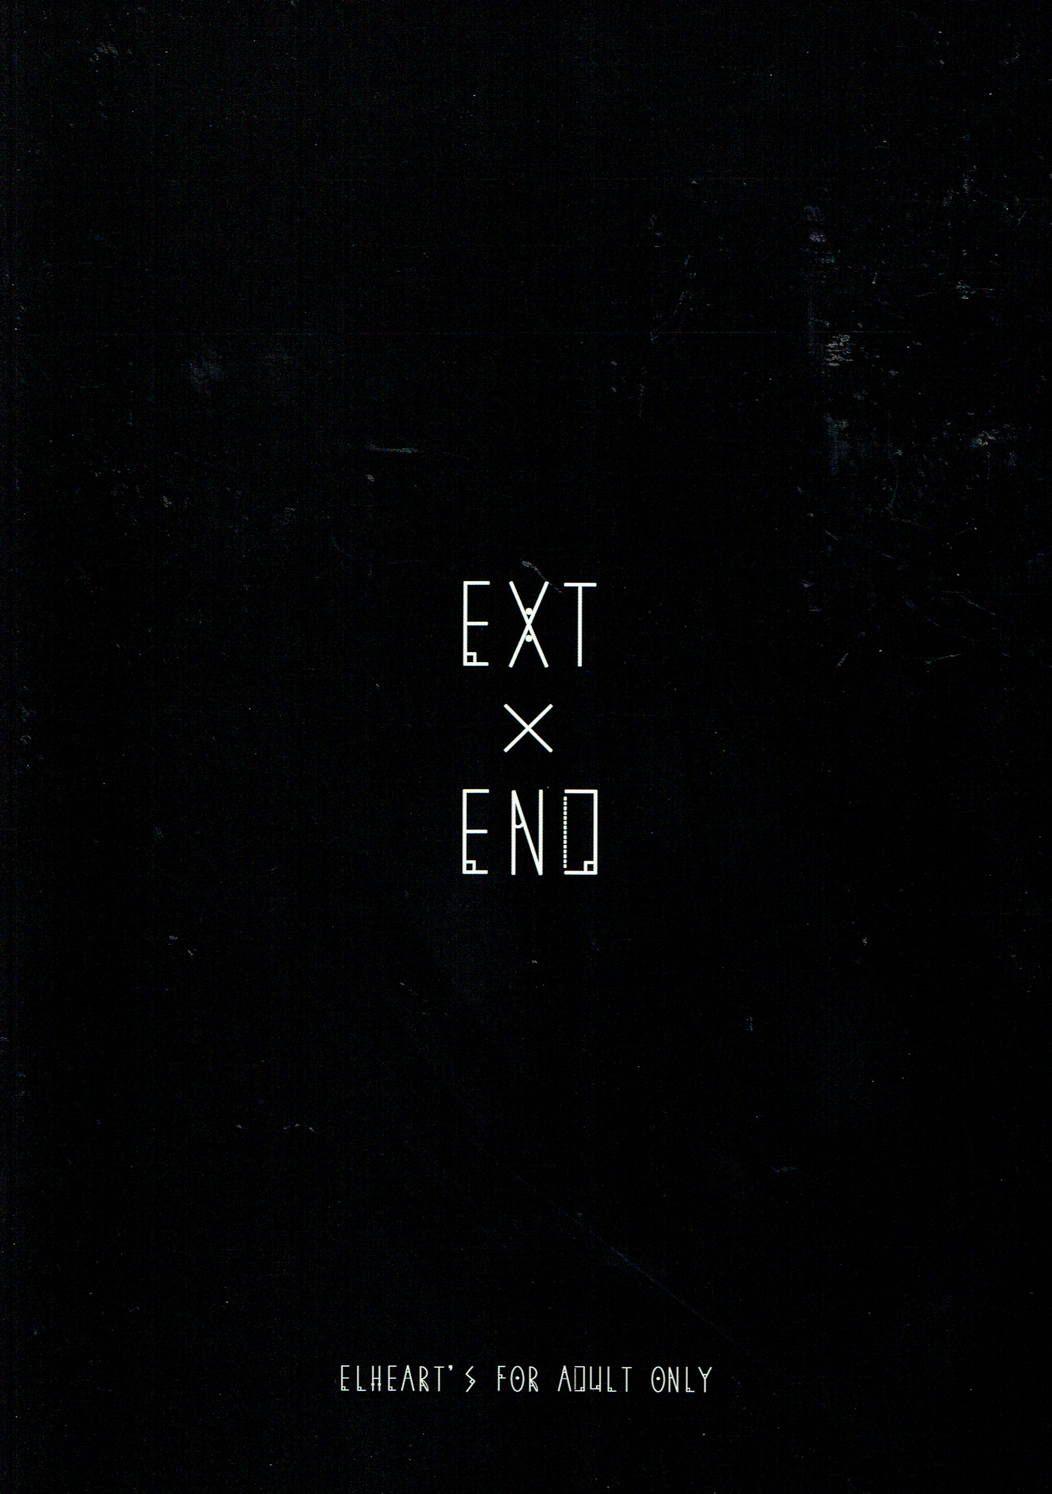 EXT x END 16